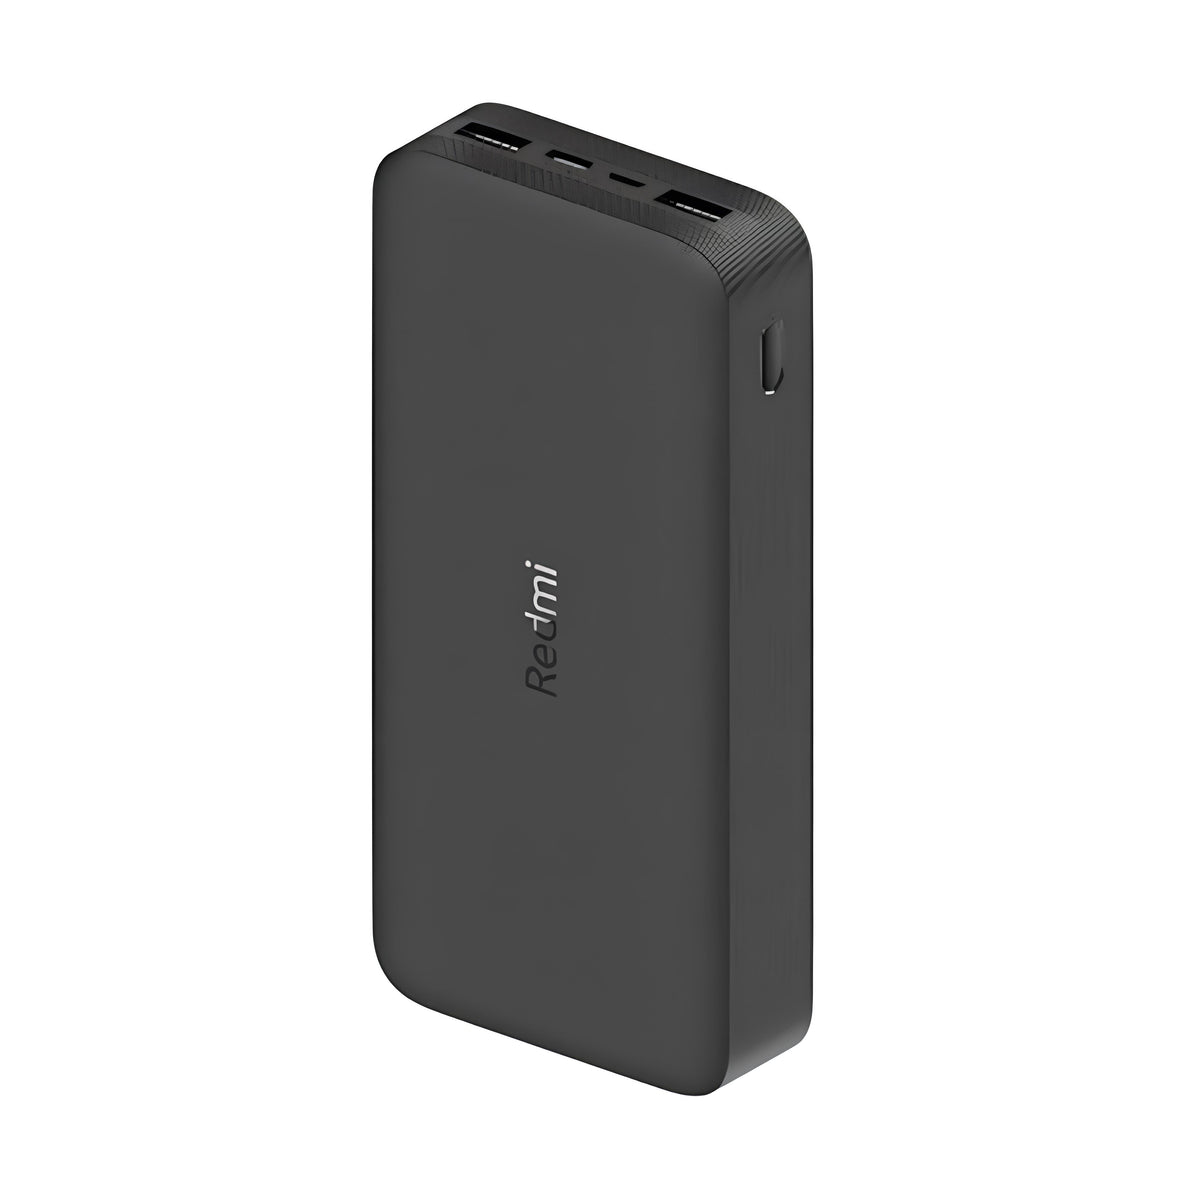 Mi Power Bank With USB to Micro Cable Black & White Fast Charging 18W 20000 Mah 2 Input & 2 Output Support